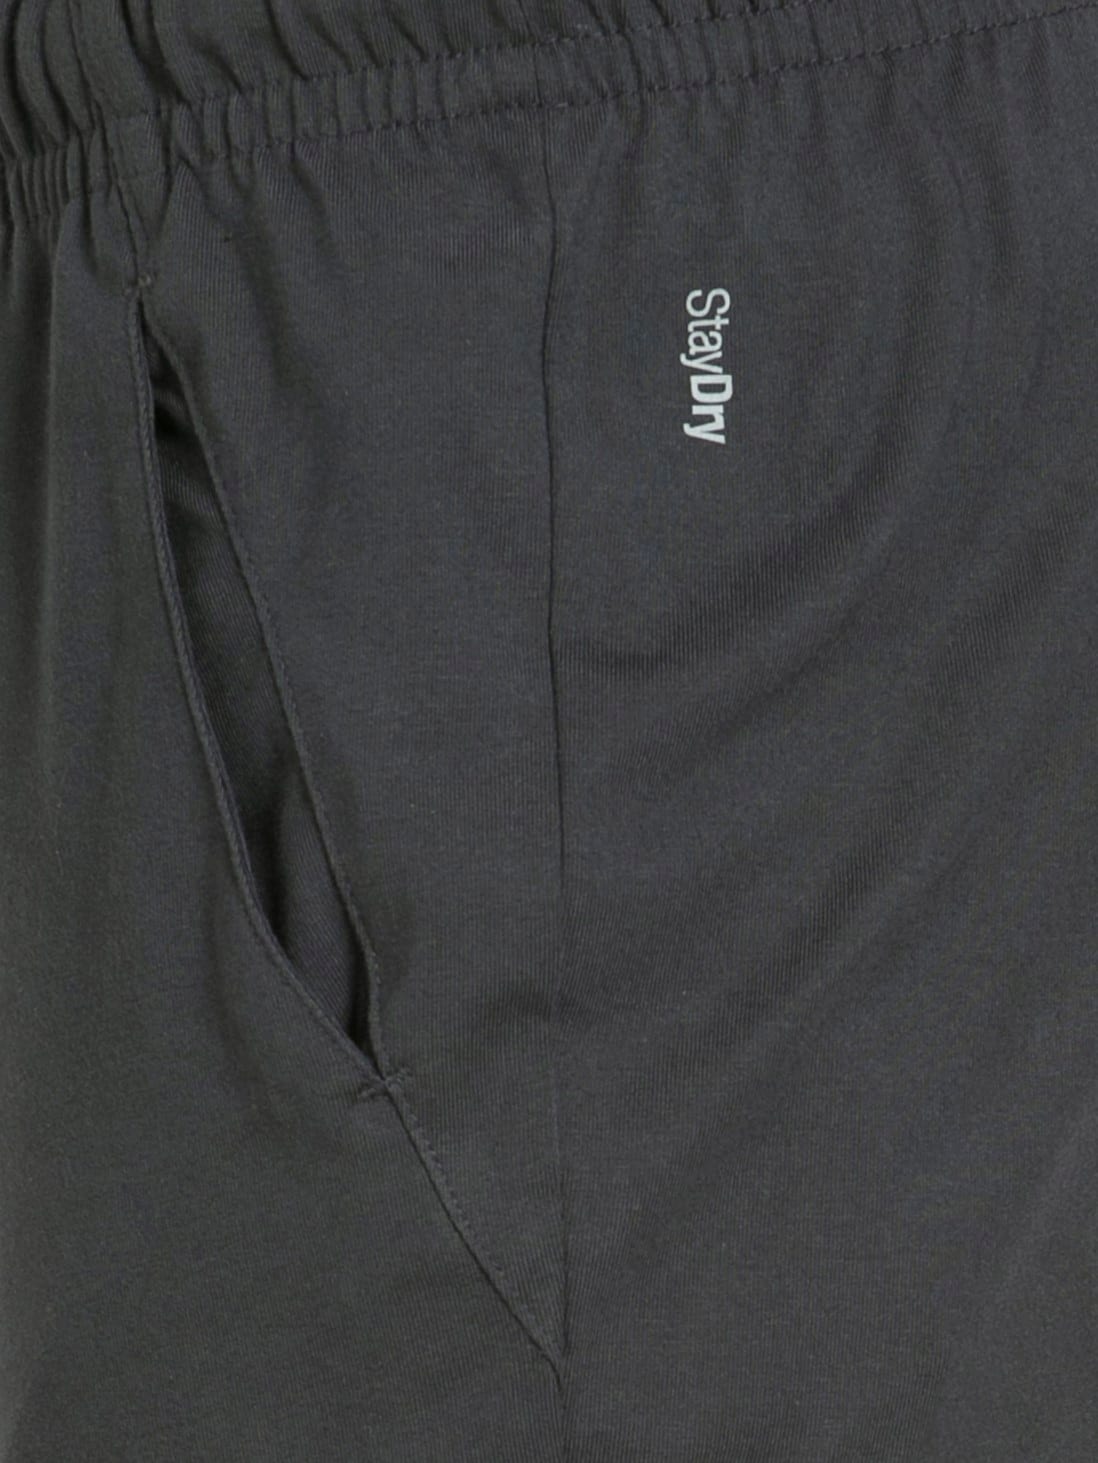 Graphite Slim Fit Joggers with Stay Dry Treatment & Drawstring Closure ...